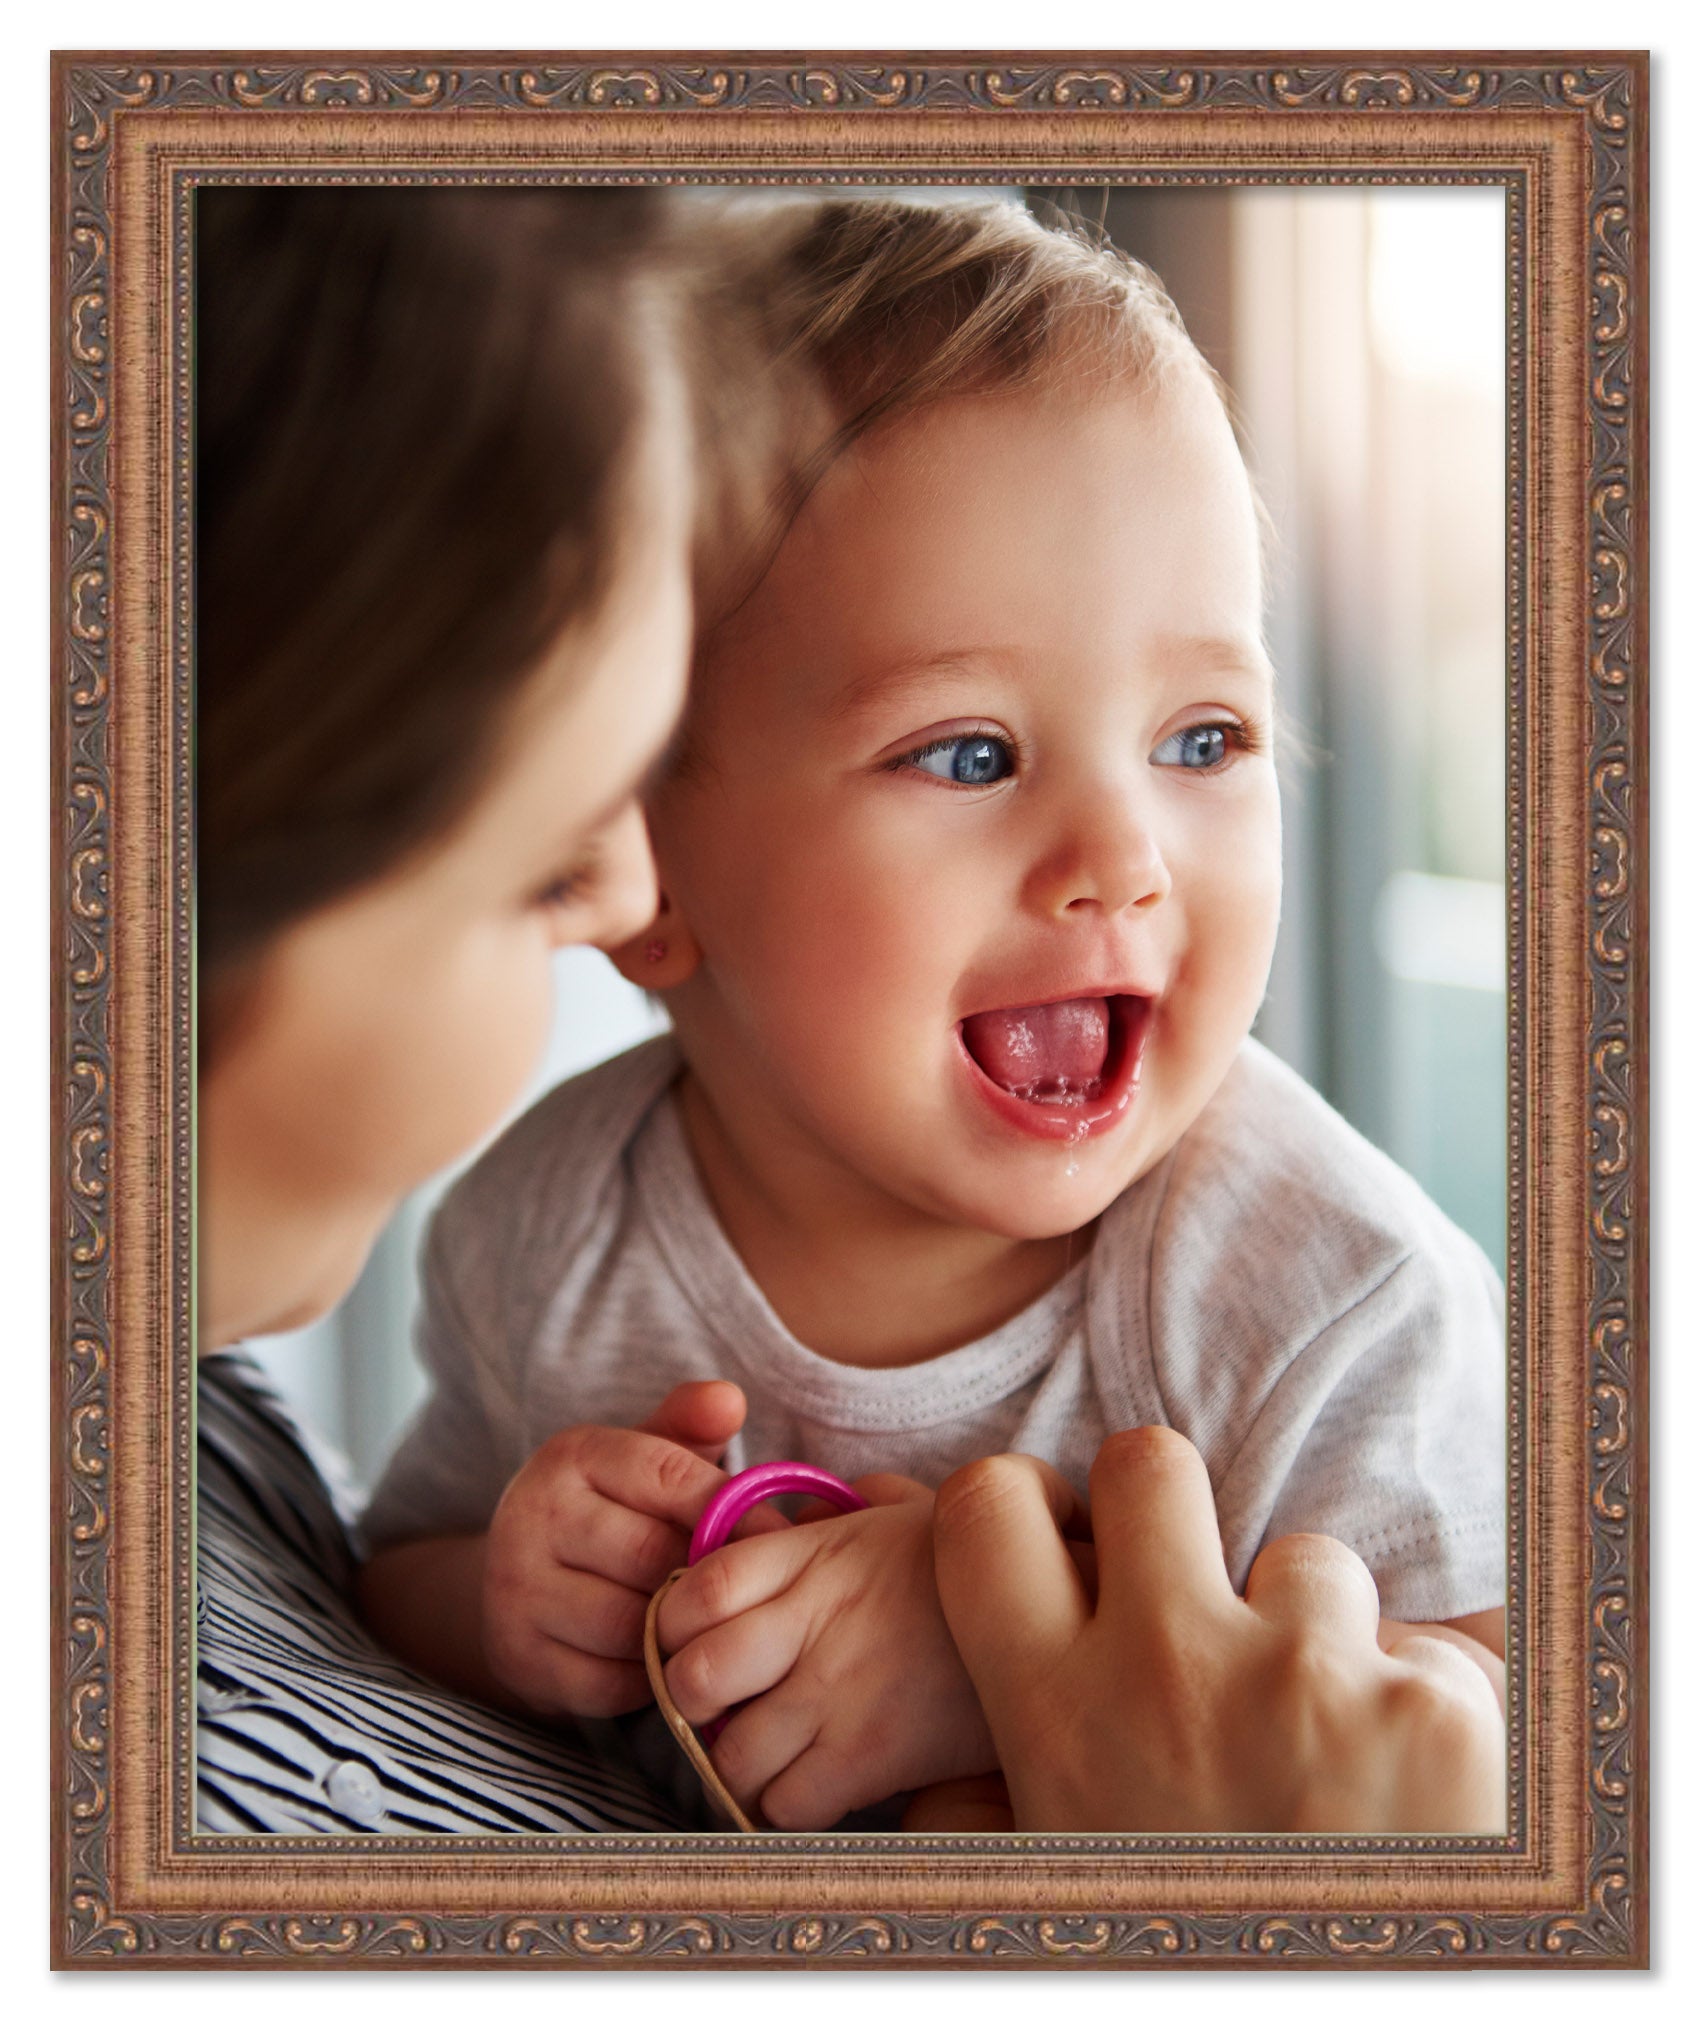 Poster Palooza 18x18 Frame Black Solid Wood Picture Square Frame Includes  UV Acrylic, Foam Board Backing & Hanging Hardware